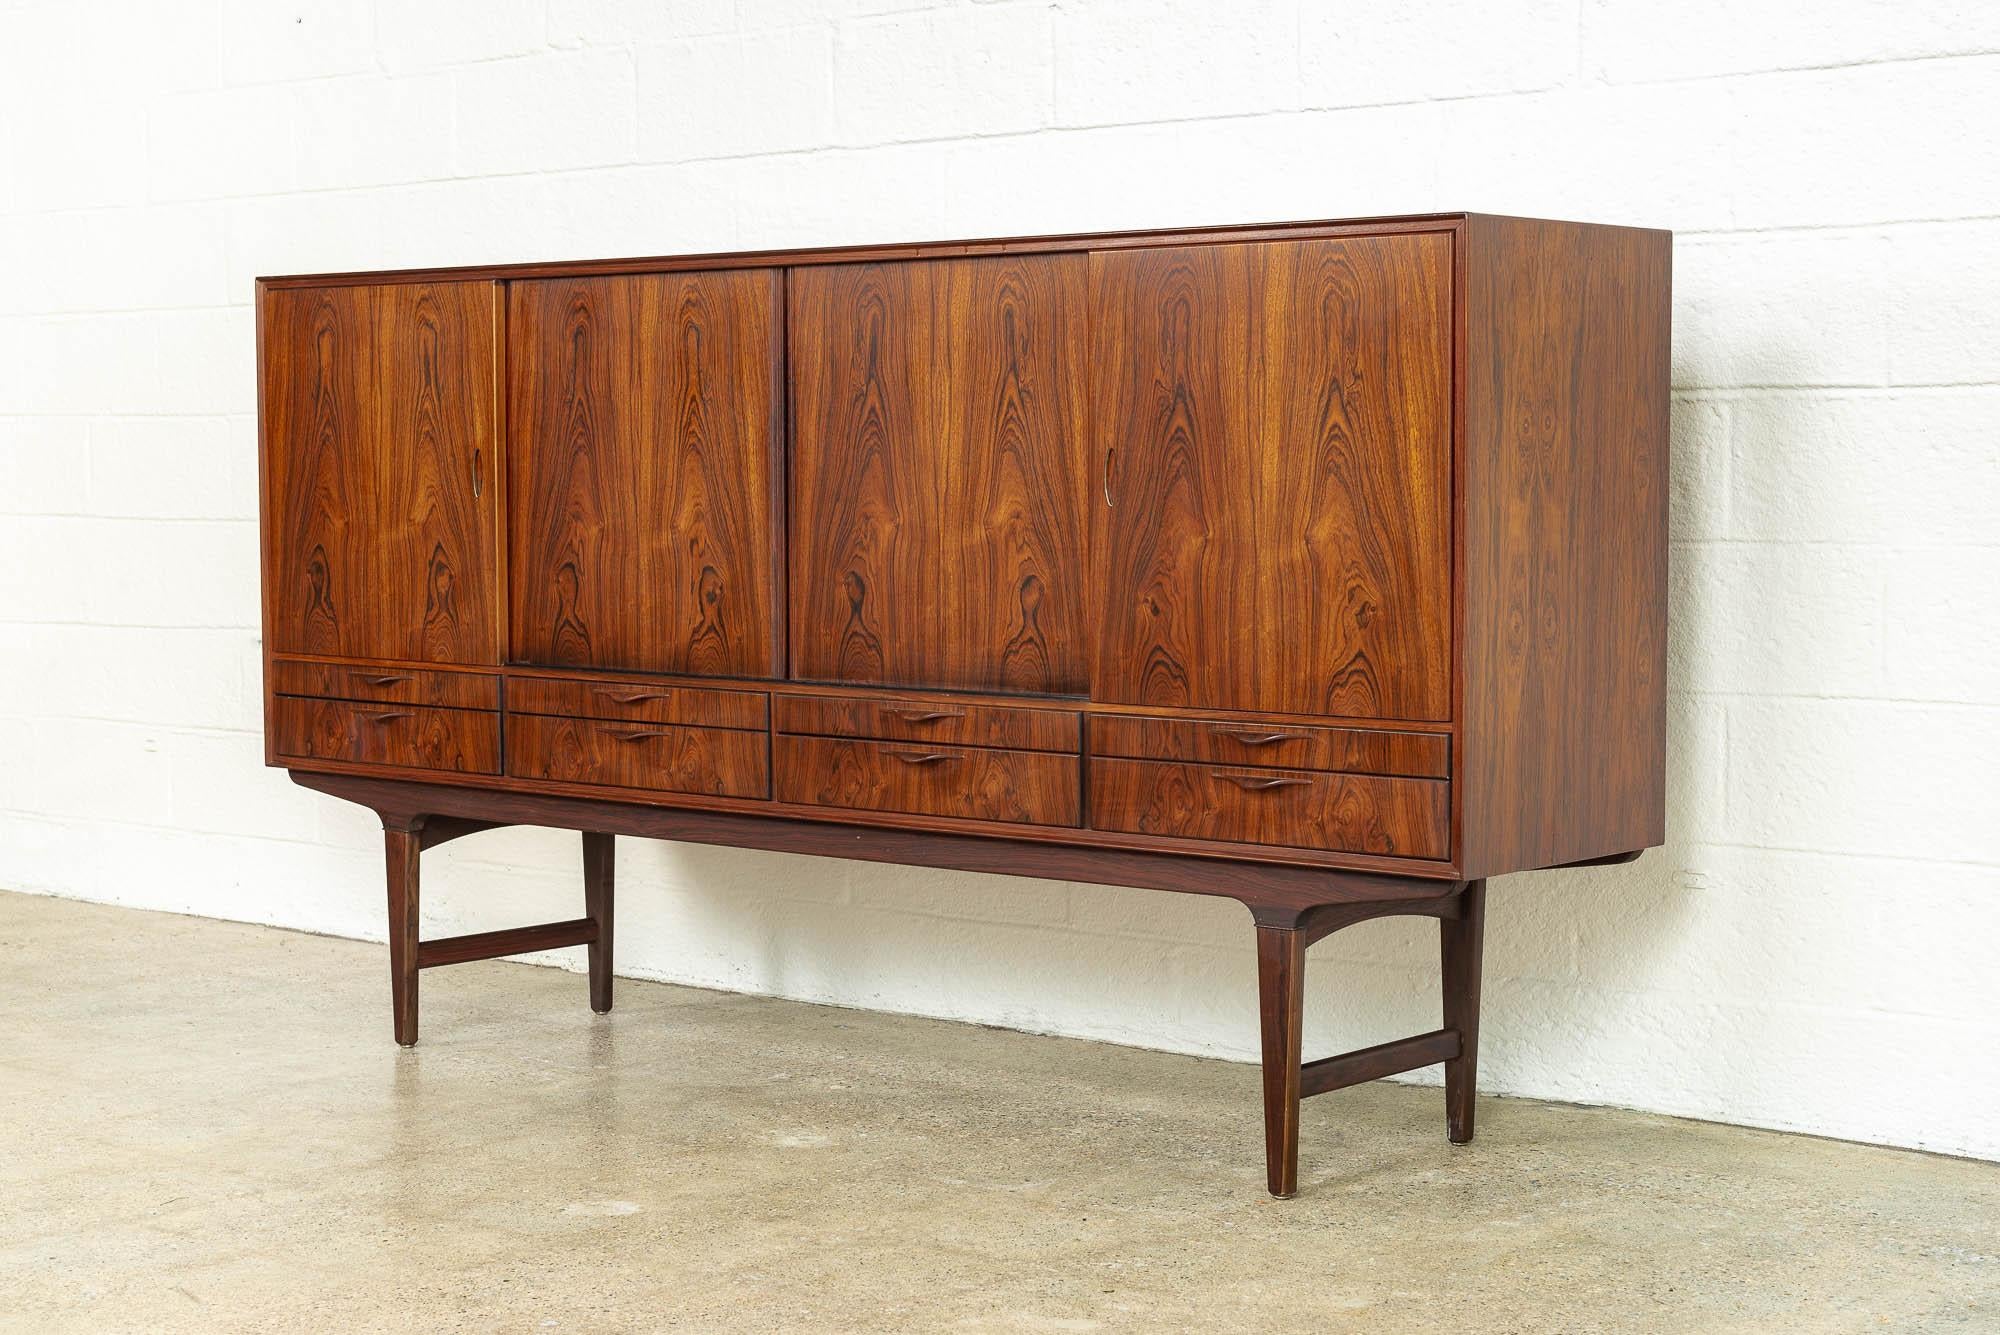 This striking midcentury Danish modern tall credenza or sideboard was made in Denmark, circa 1960. Exceptionally crafted, this rosewood cabinet features stunning grain pattern and all finished interiors, including the shelves and drawers. The upper